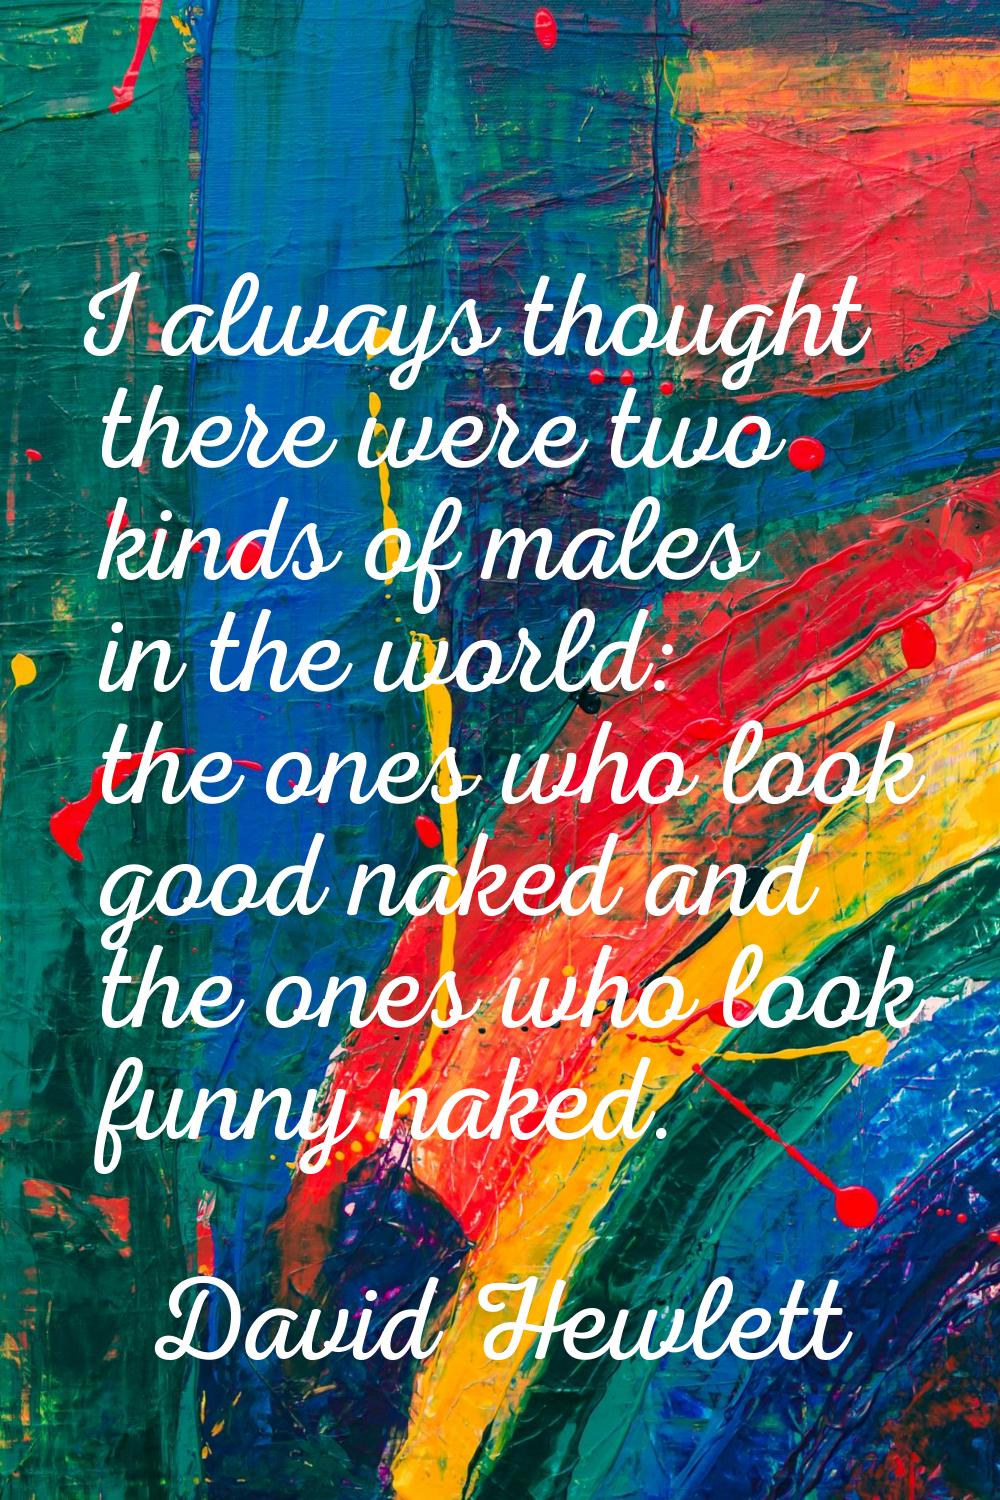 I always thought there were two kinds of males in the world: the ones who look good naked and the o